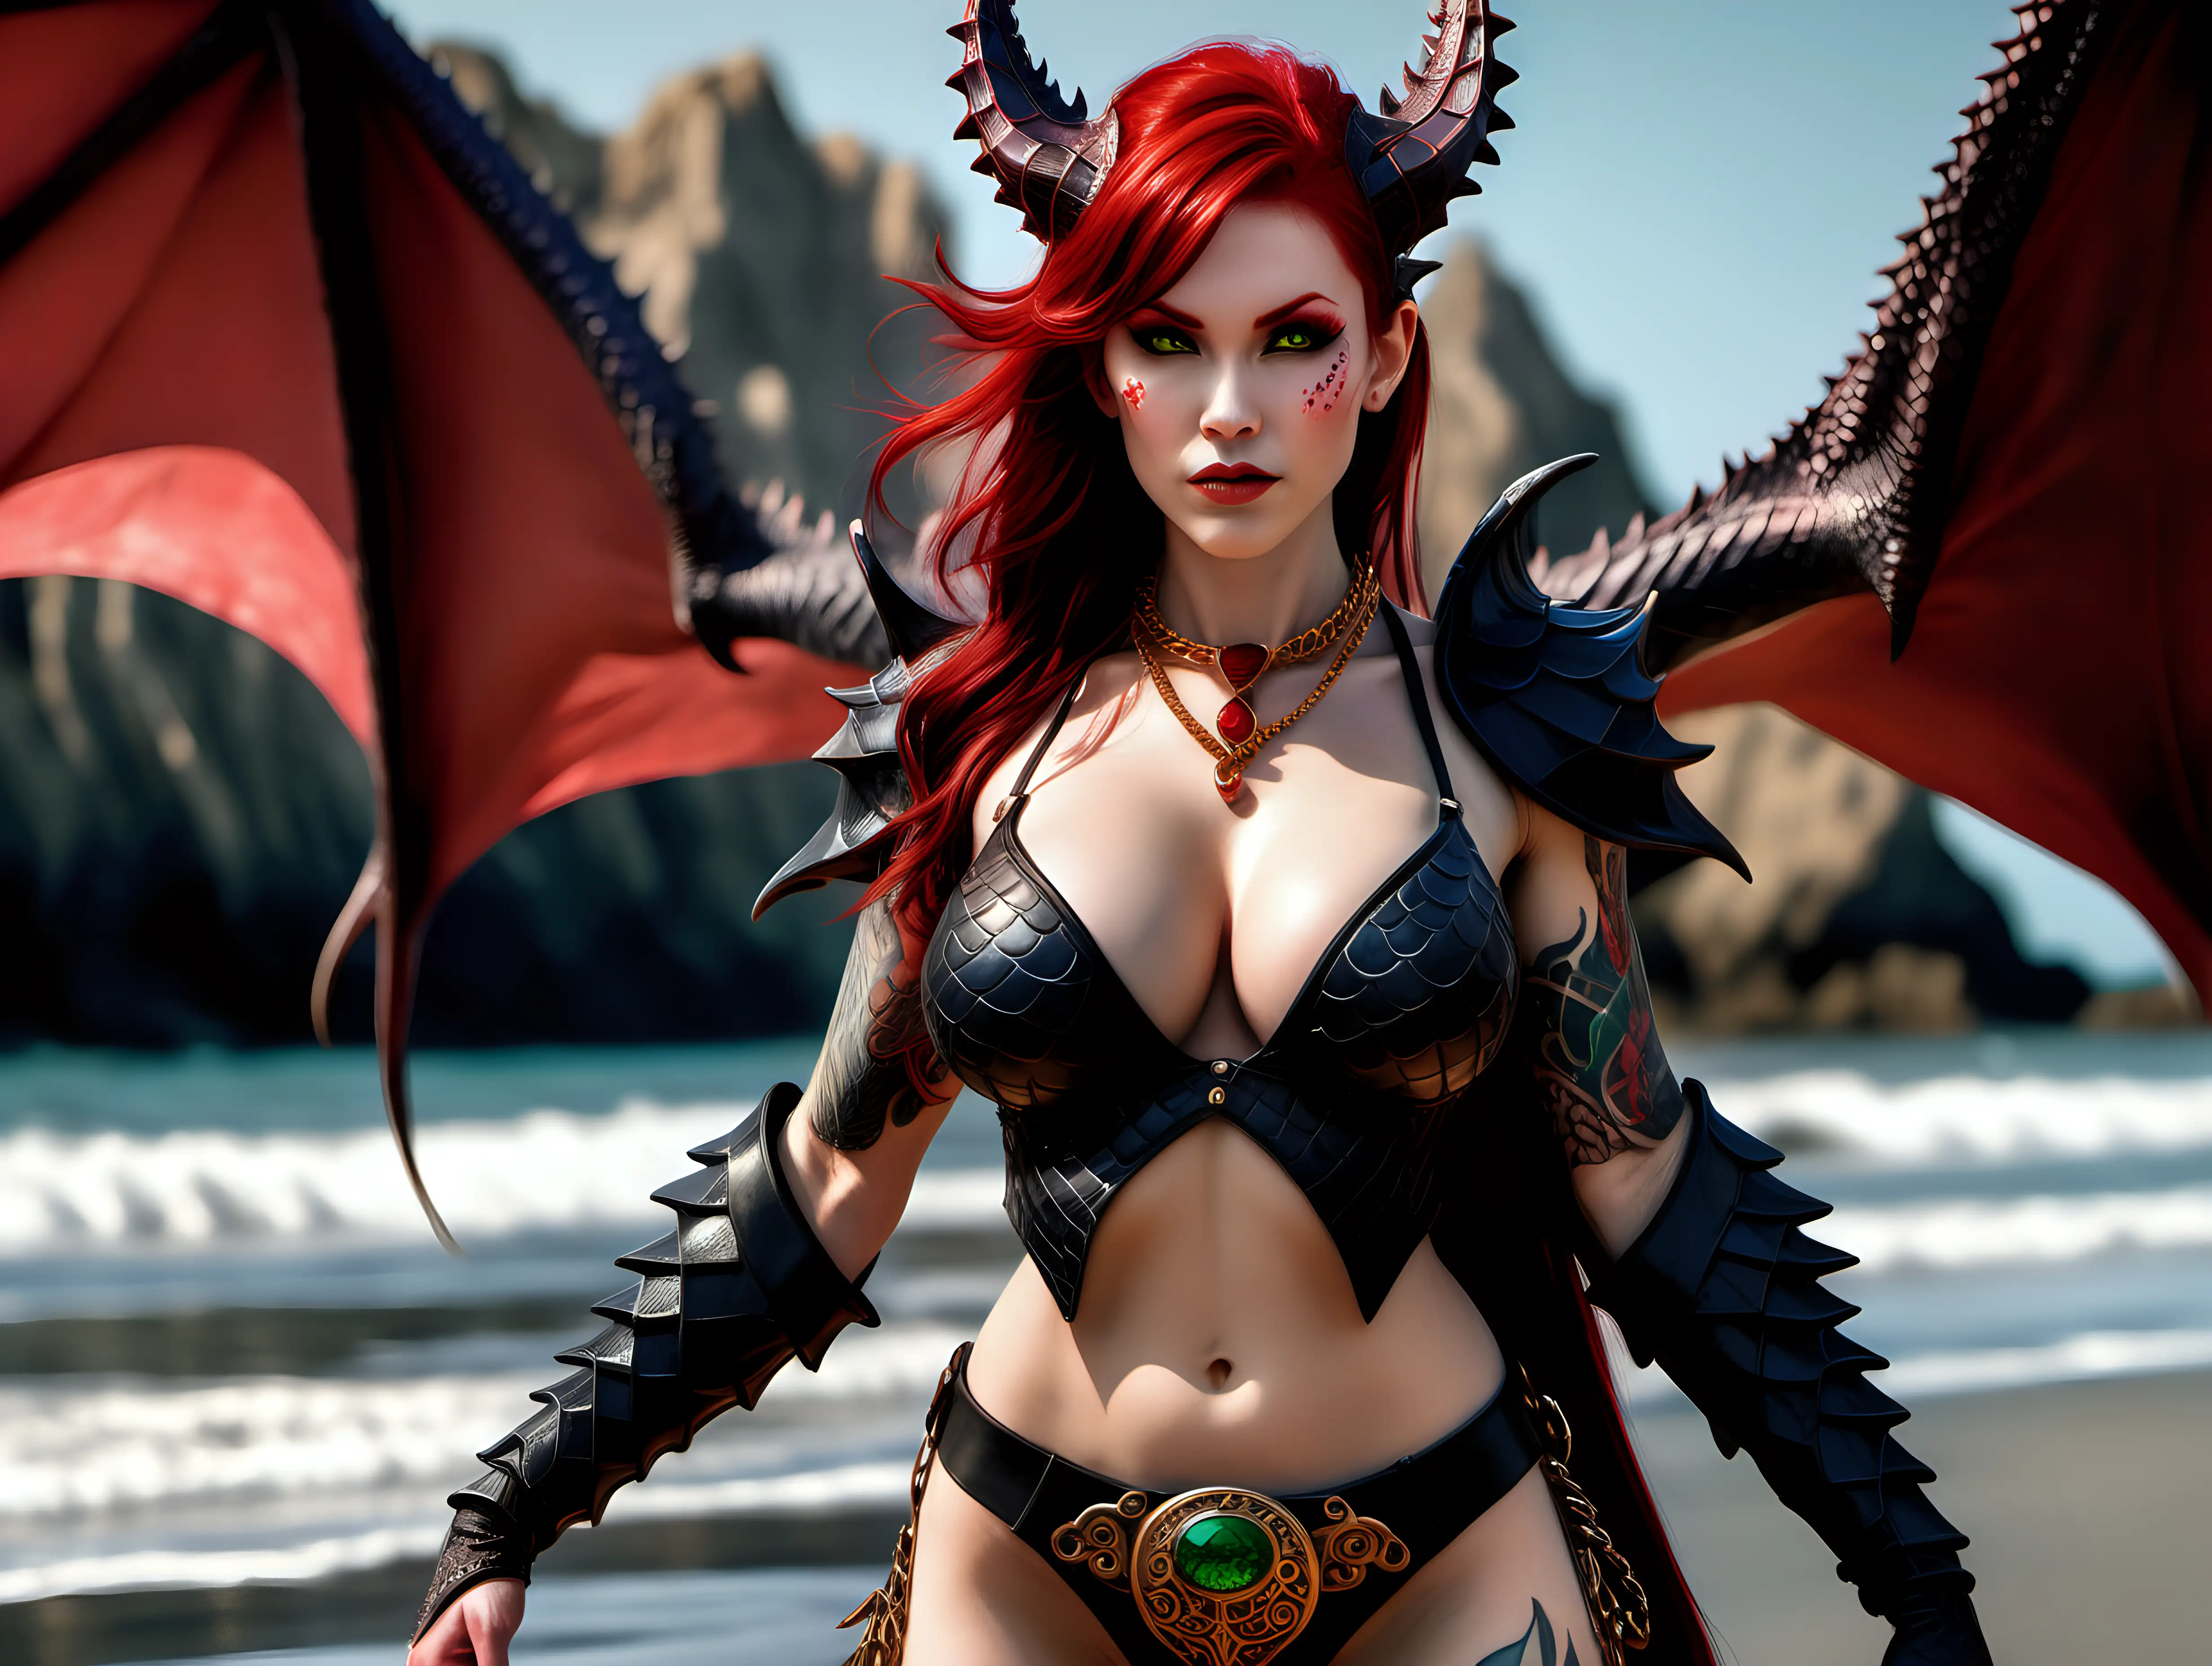 ultra-realistic high resolution and highly detailed photo of a female dragonrider, with sleek pointy horns gently swept straight backwards over head, large breasts, red hair, red eyes, a gold necklace with a red ruby, open front top made of red scales, low pants made of black scales, and draconic tattoos on arms and body, standing on a beach. next to her stands a large black dragon with a green saddle.